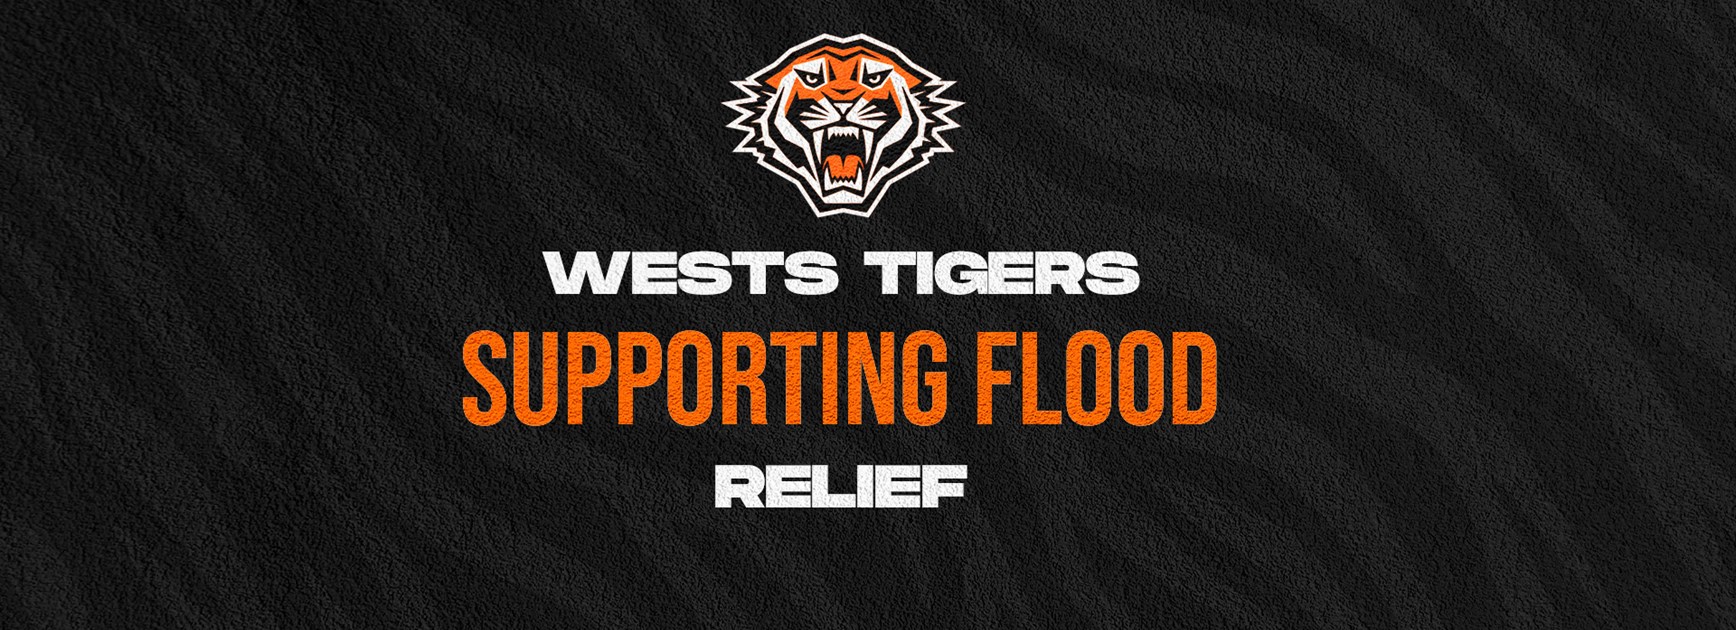 Wests Tigers launch Jersey Auction for Flood Relief